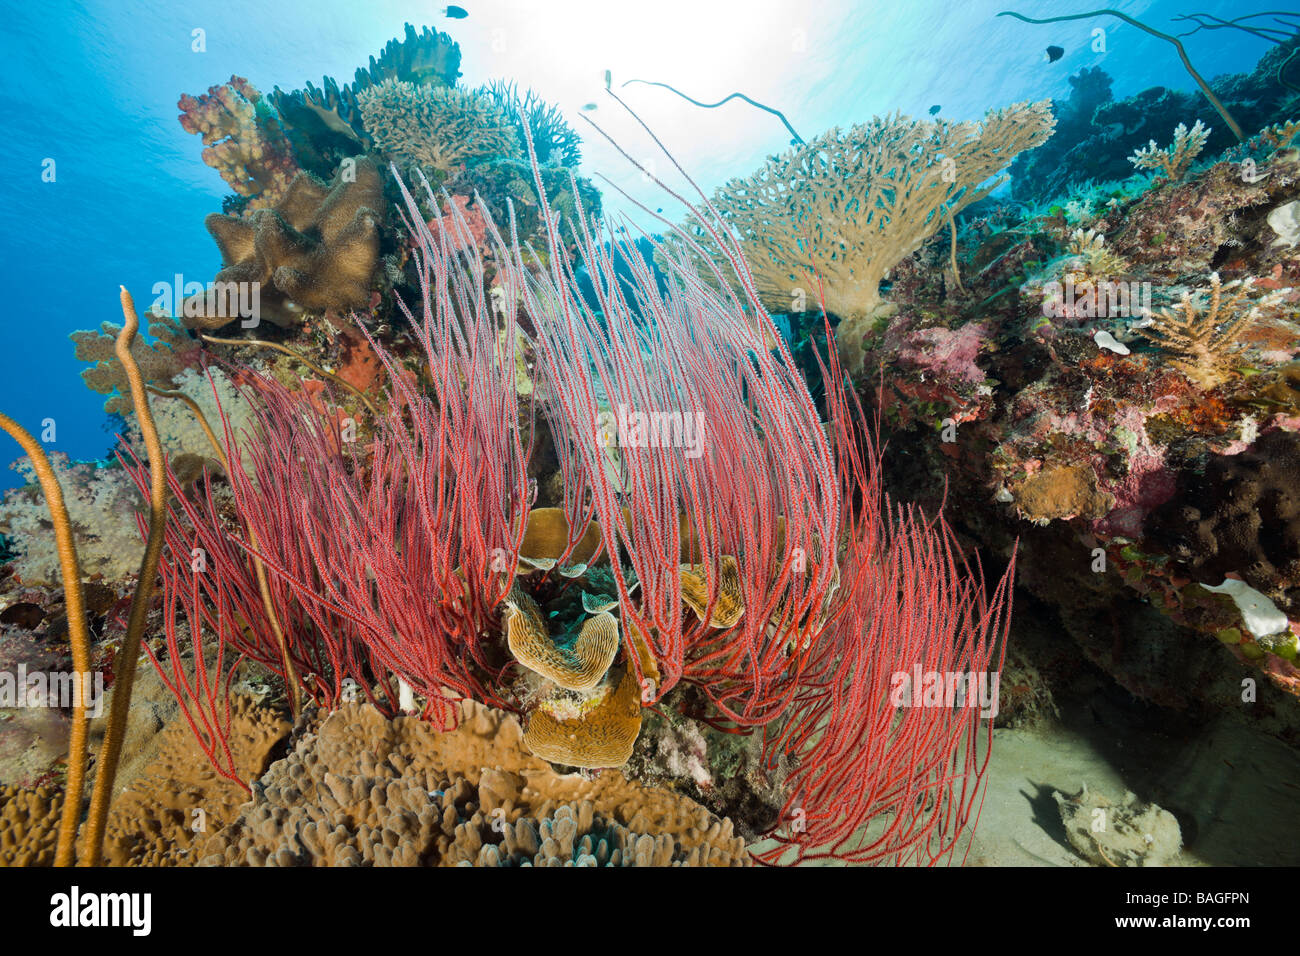 Reef with Whip Corals Ellisella ceratophyta Junceella fragilis Ulong Channel Micronesia Palau Stock Photo